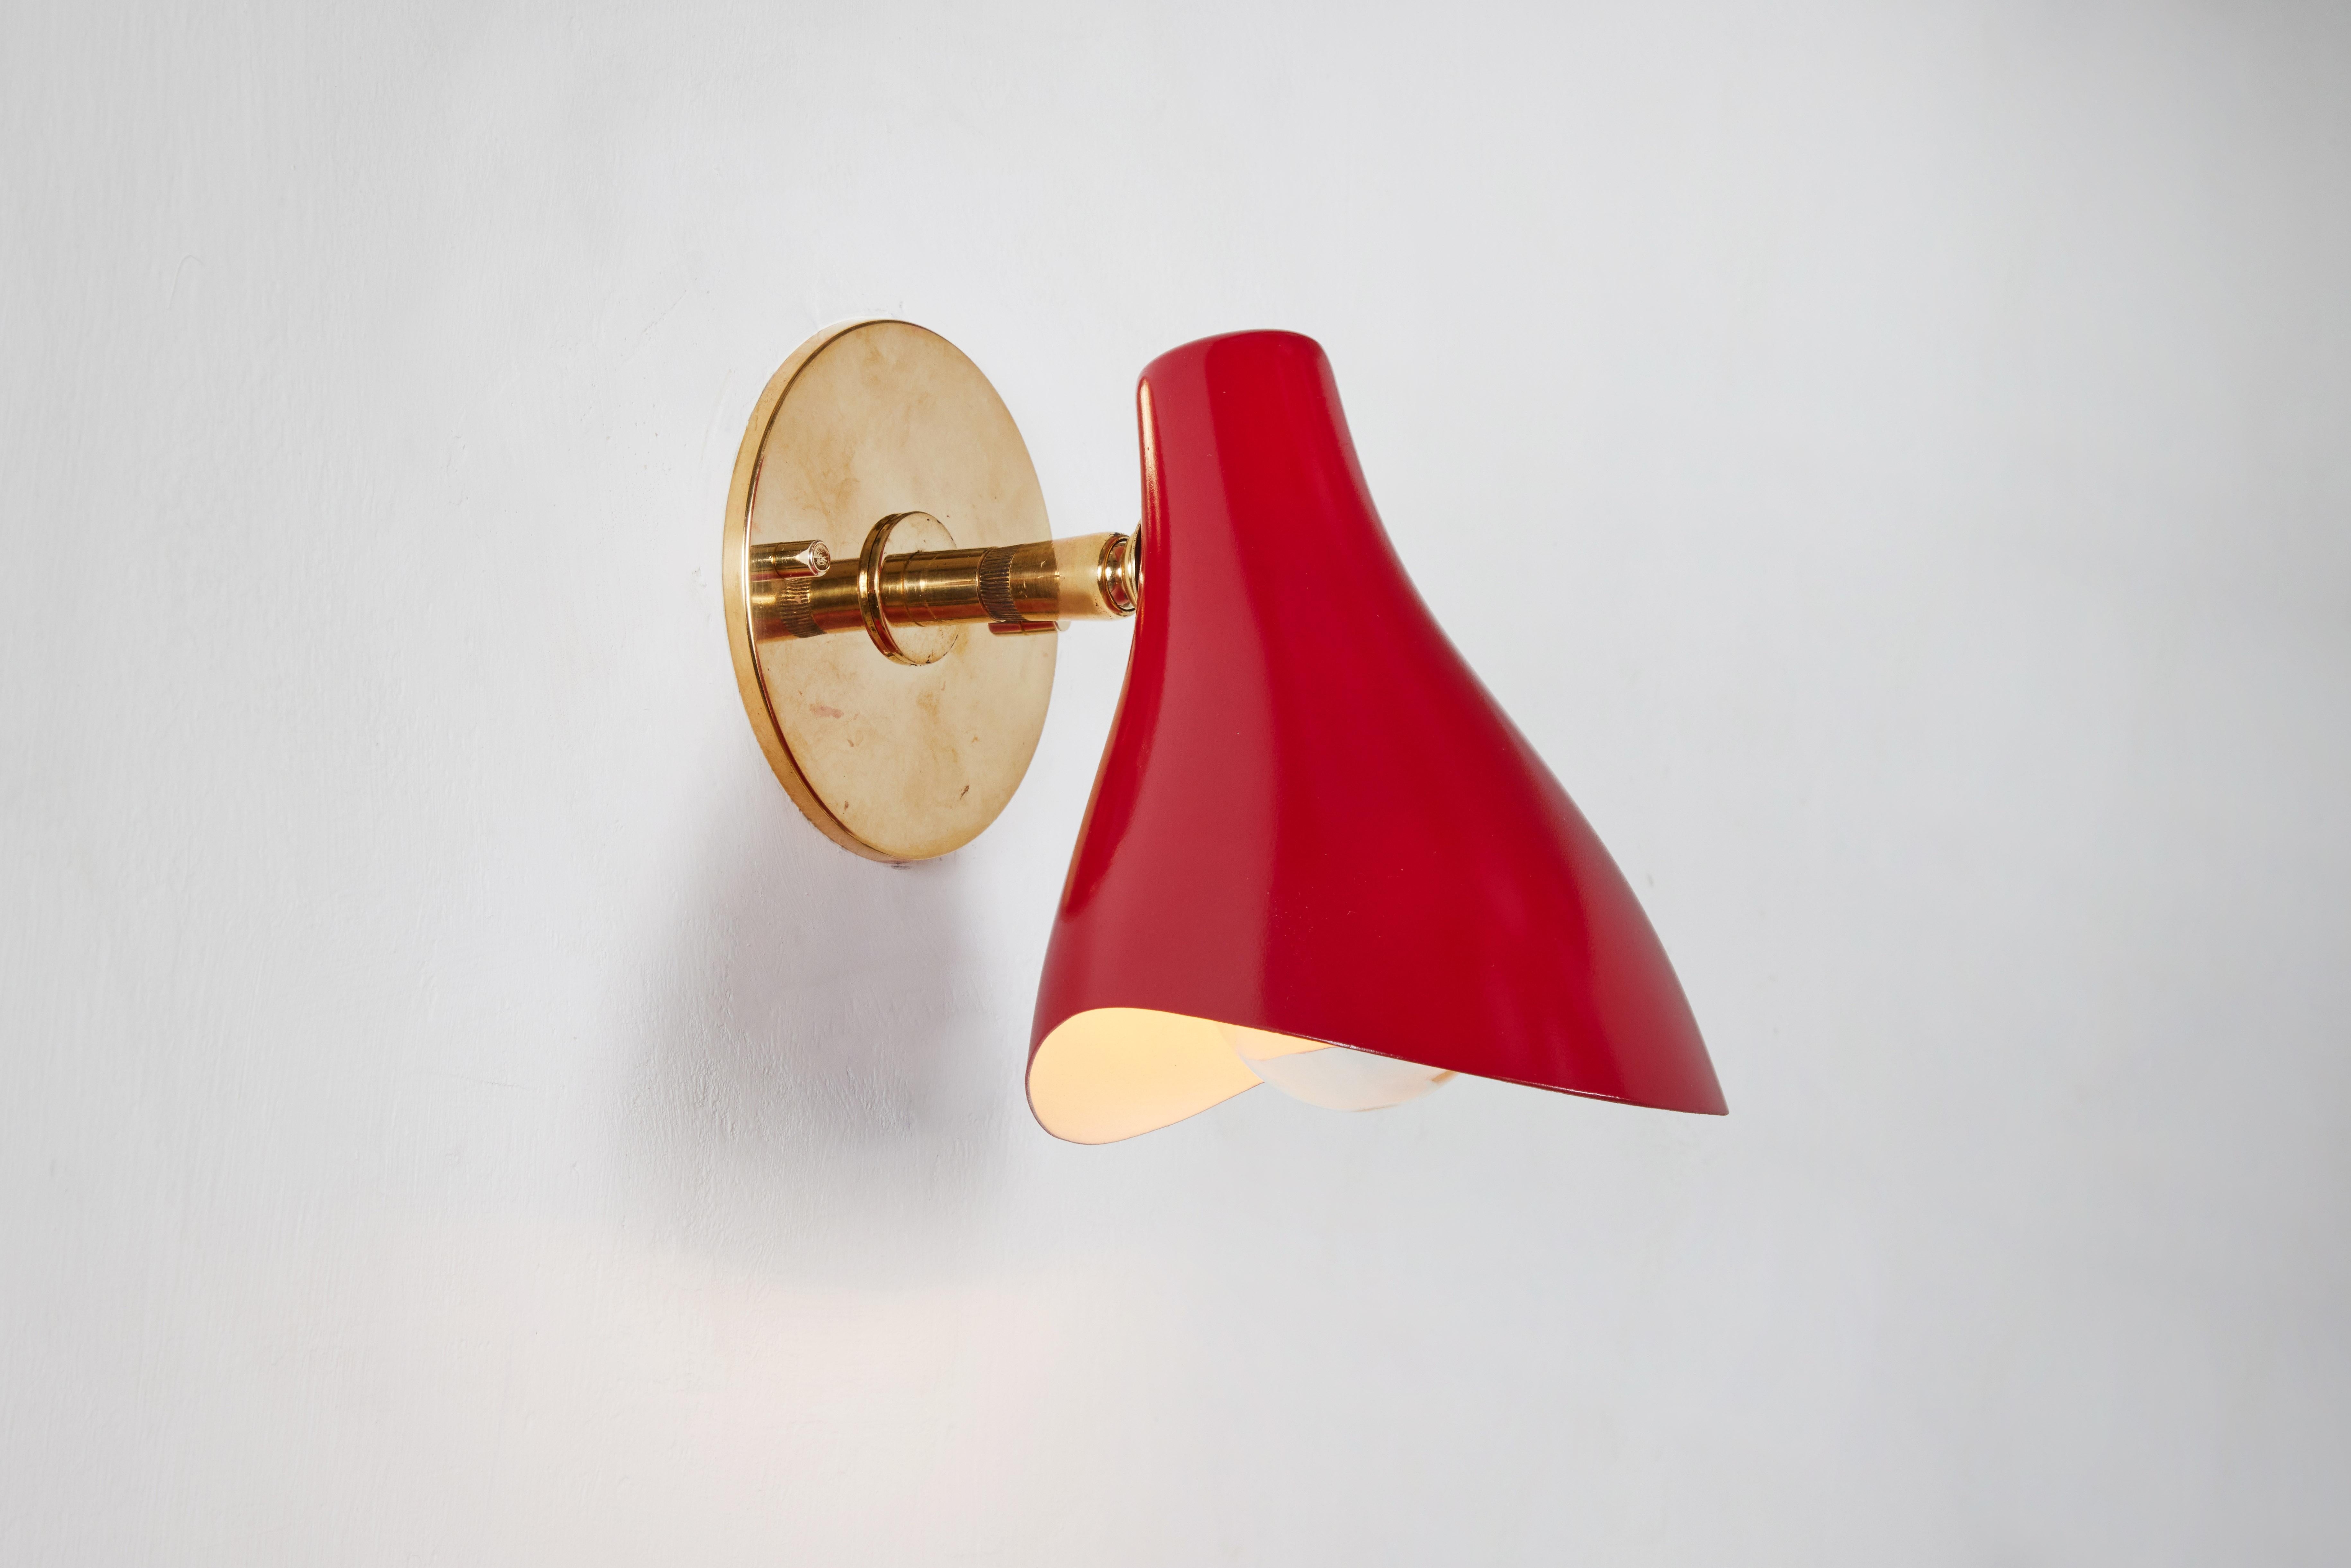 Pair of Gino Sarfatti Model #10 Sconces in Red for Arteluce For Sale 6